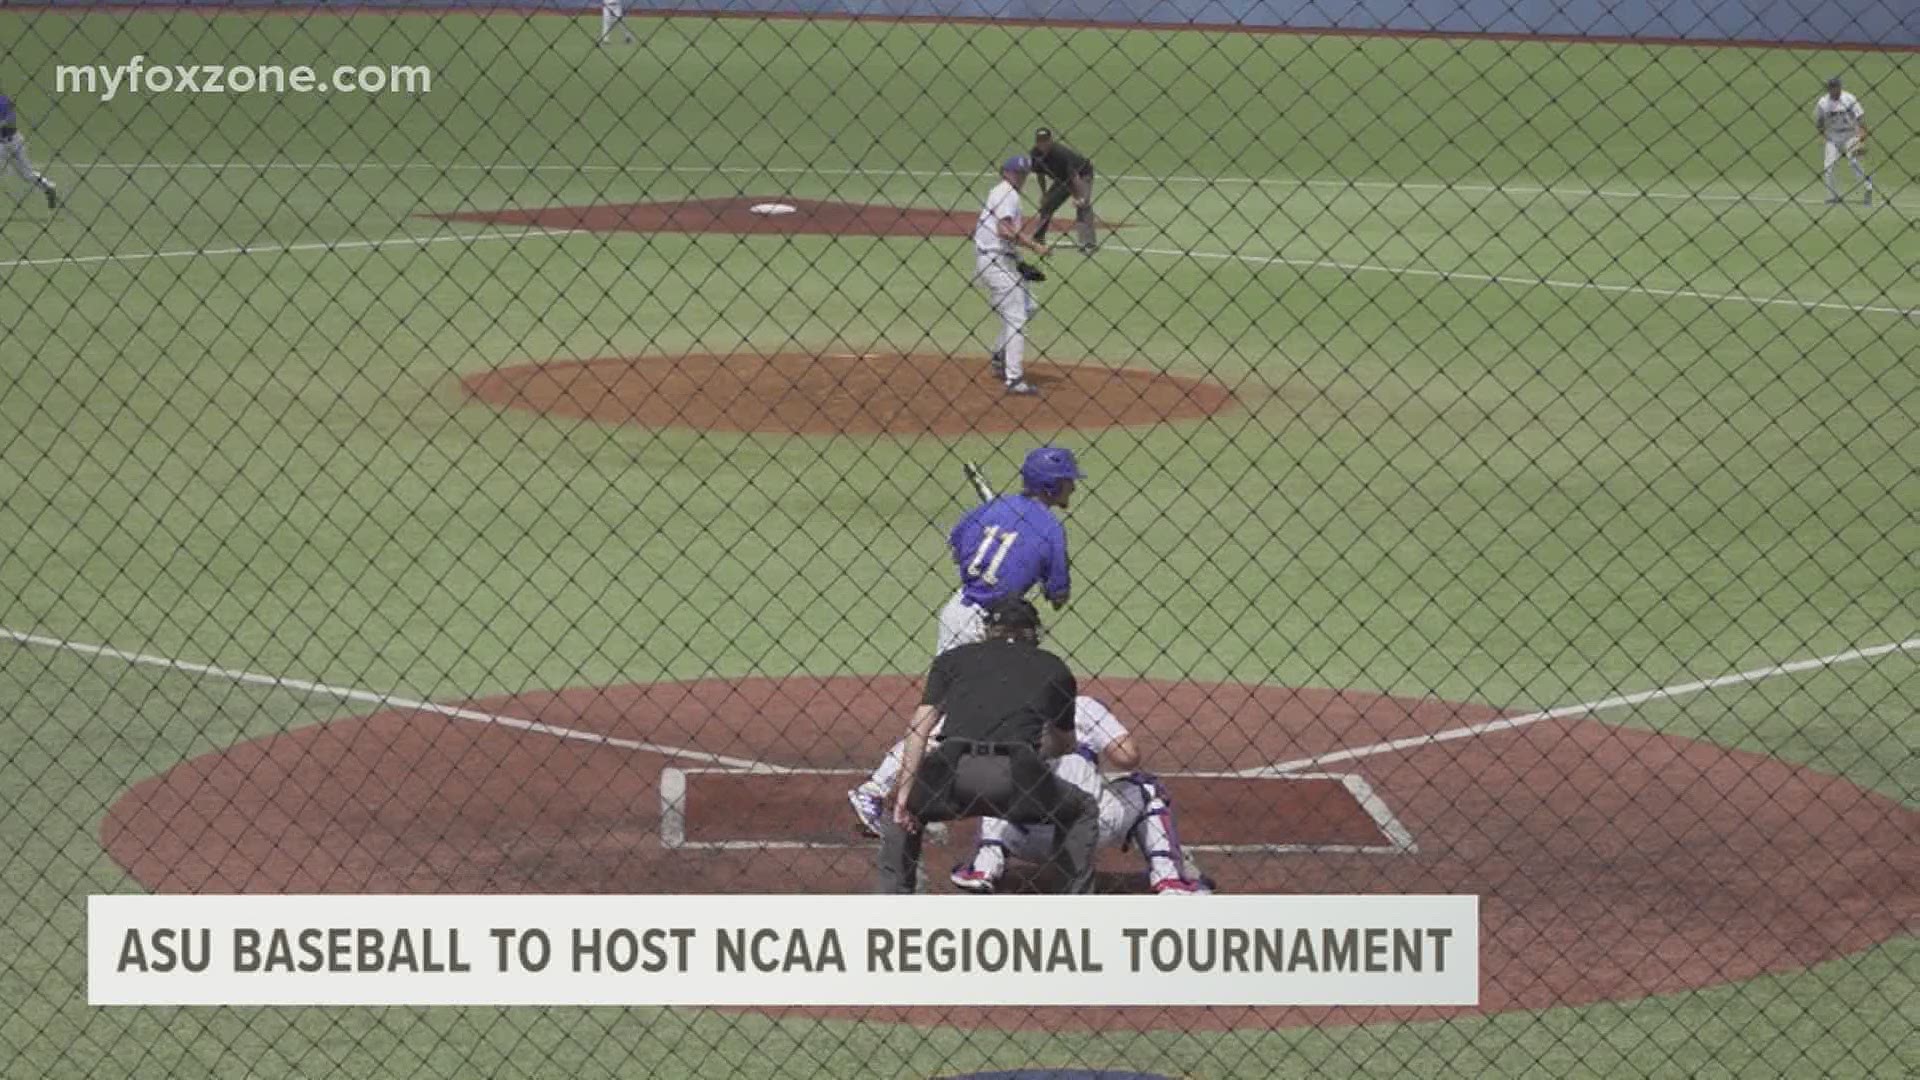 Angelo State is entering the tournament as the third seed.